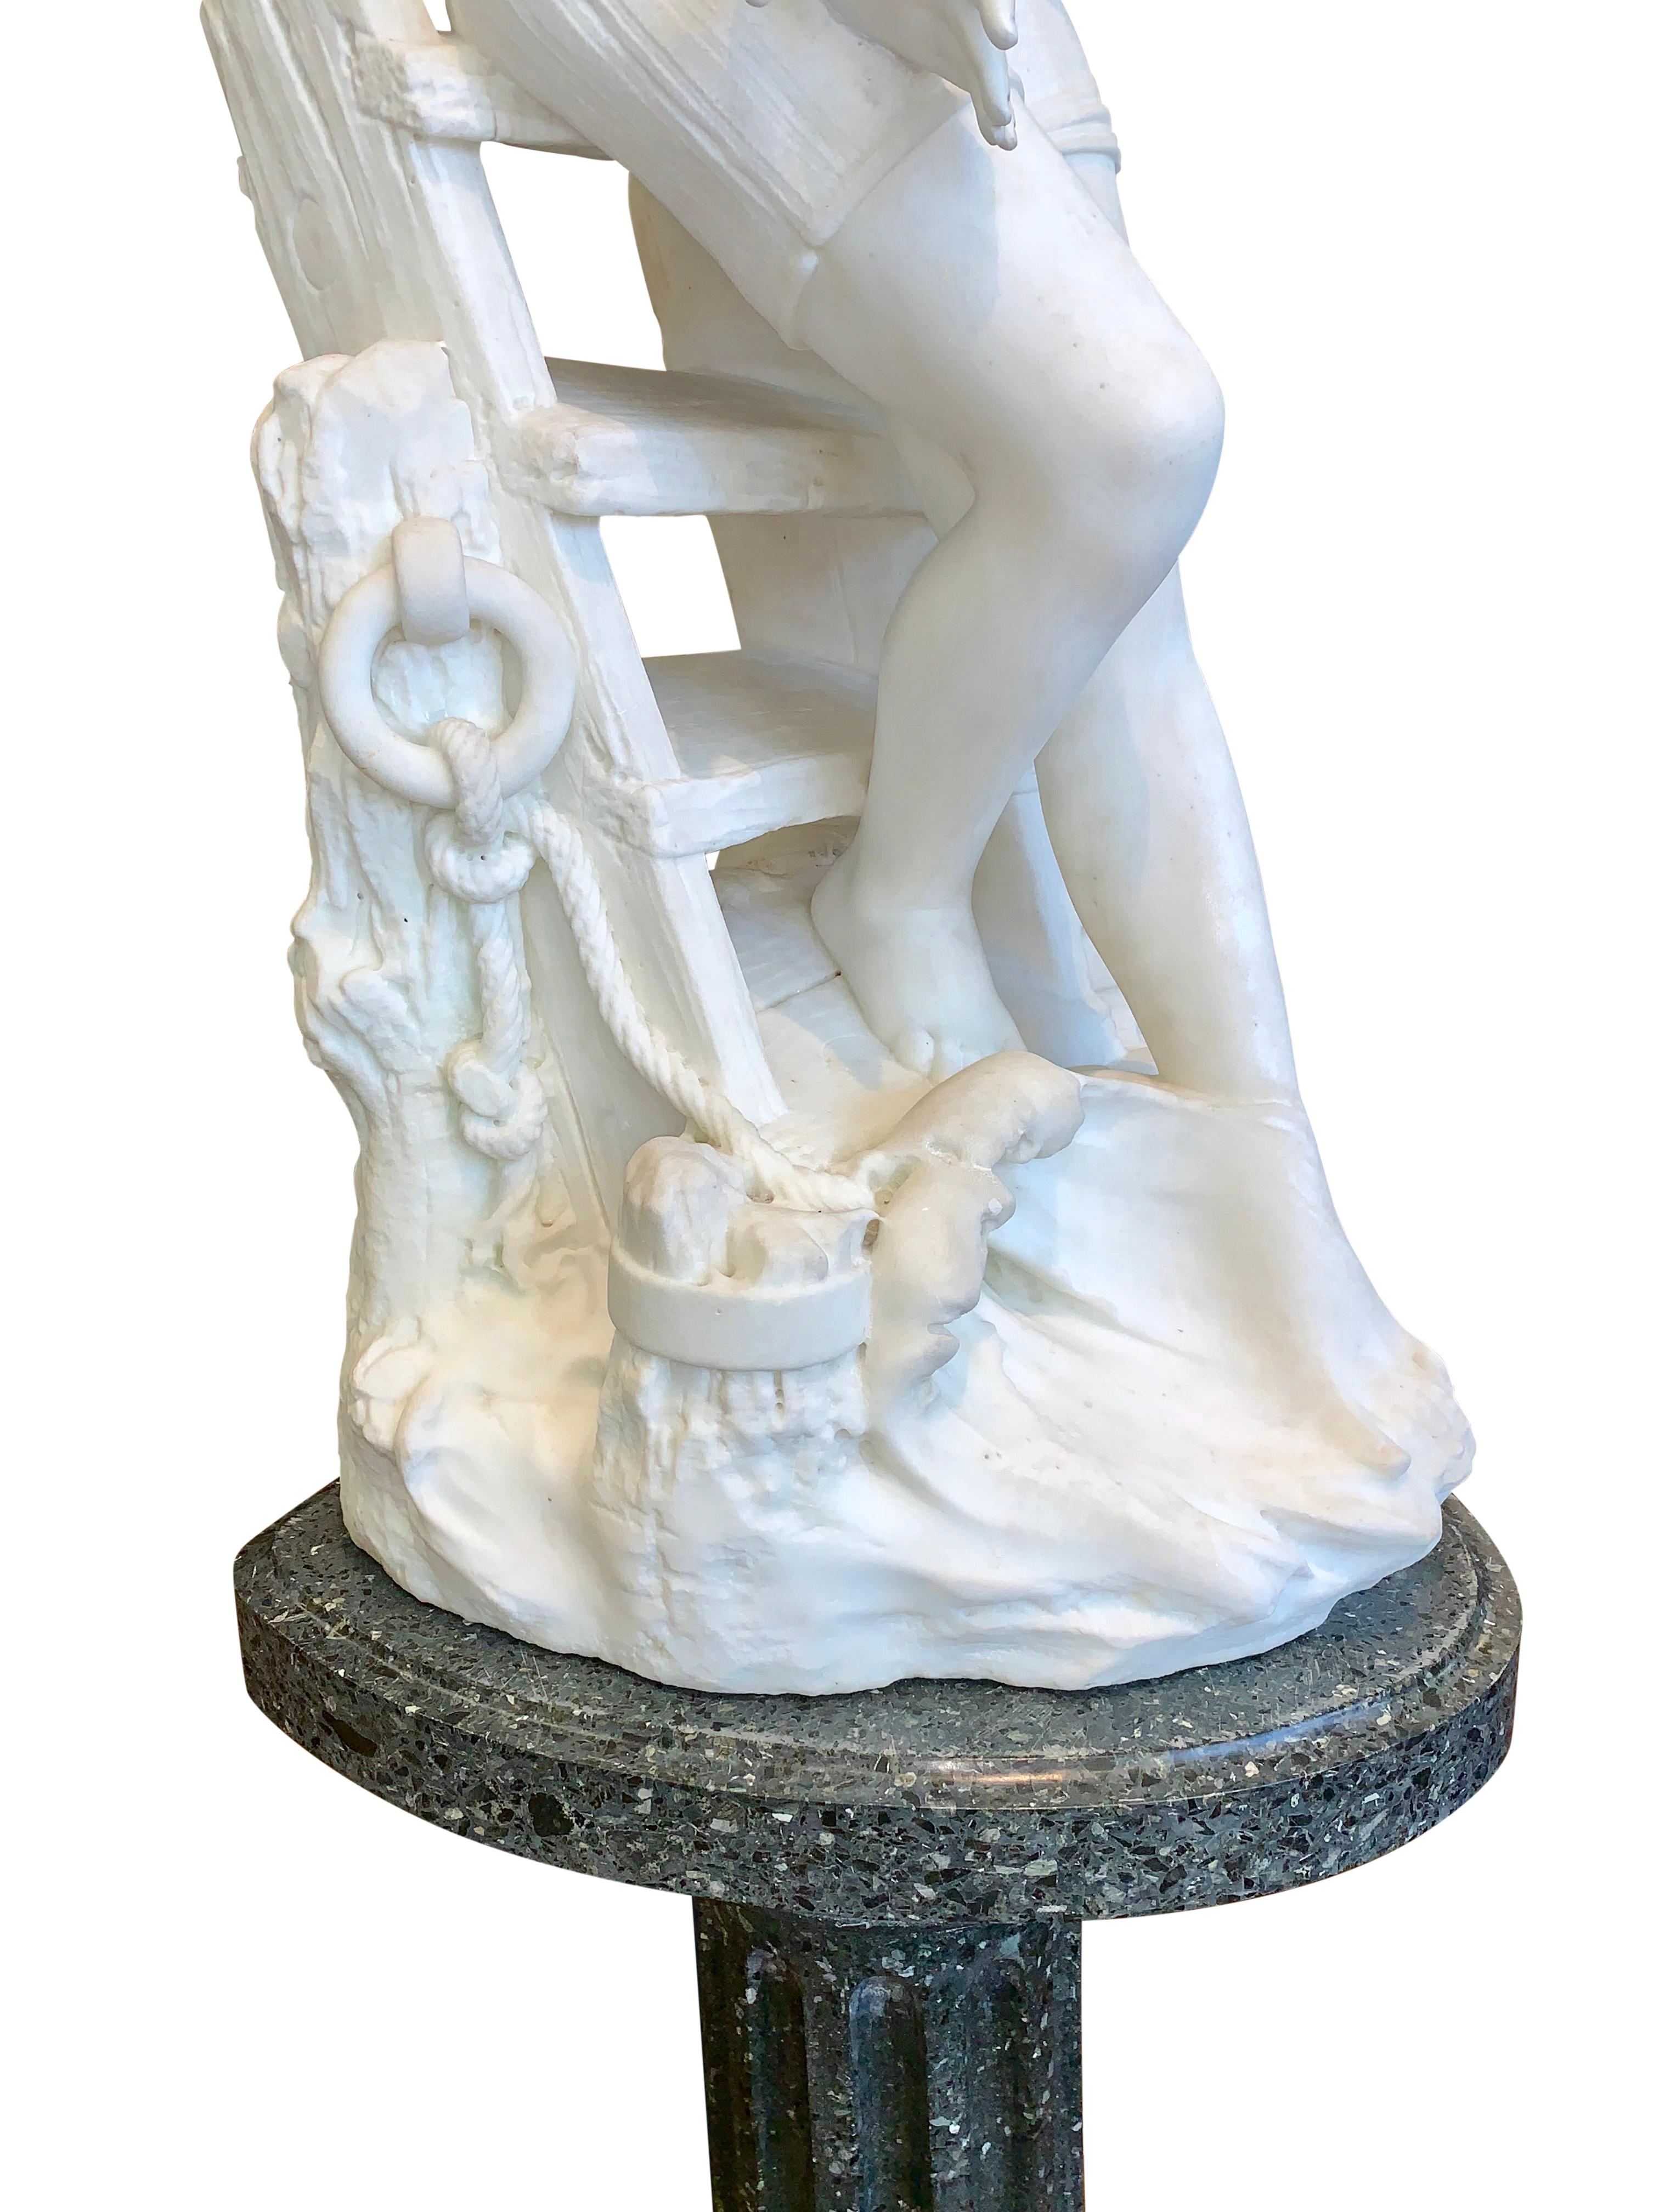 19th Century Marble Figure by Emilio Fiaschi, 'Testing The Waters' For Sale